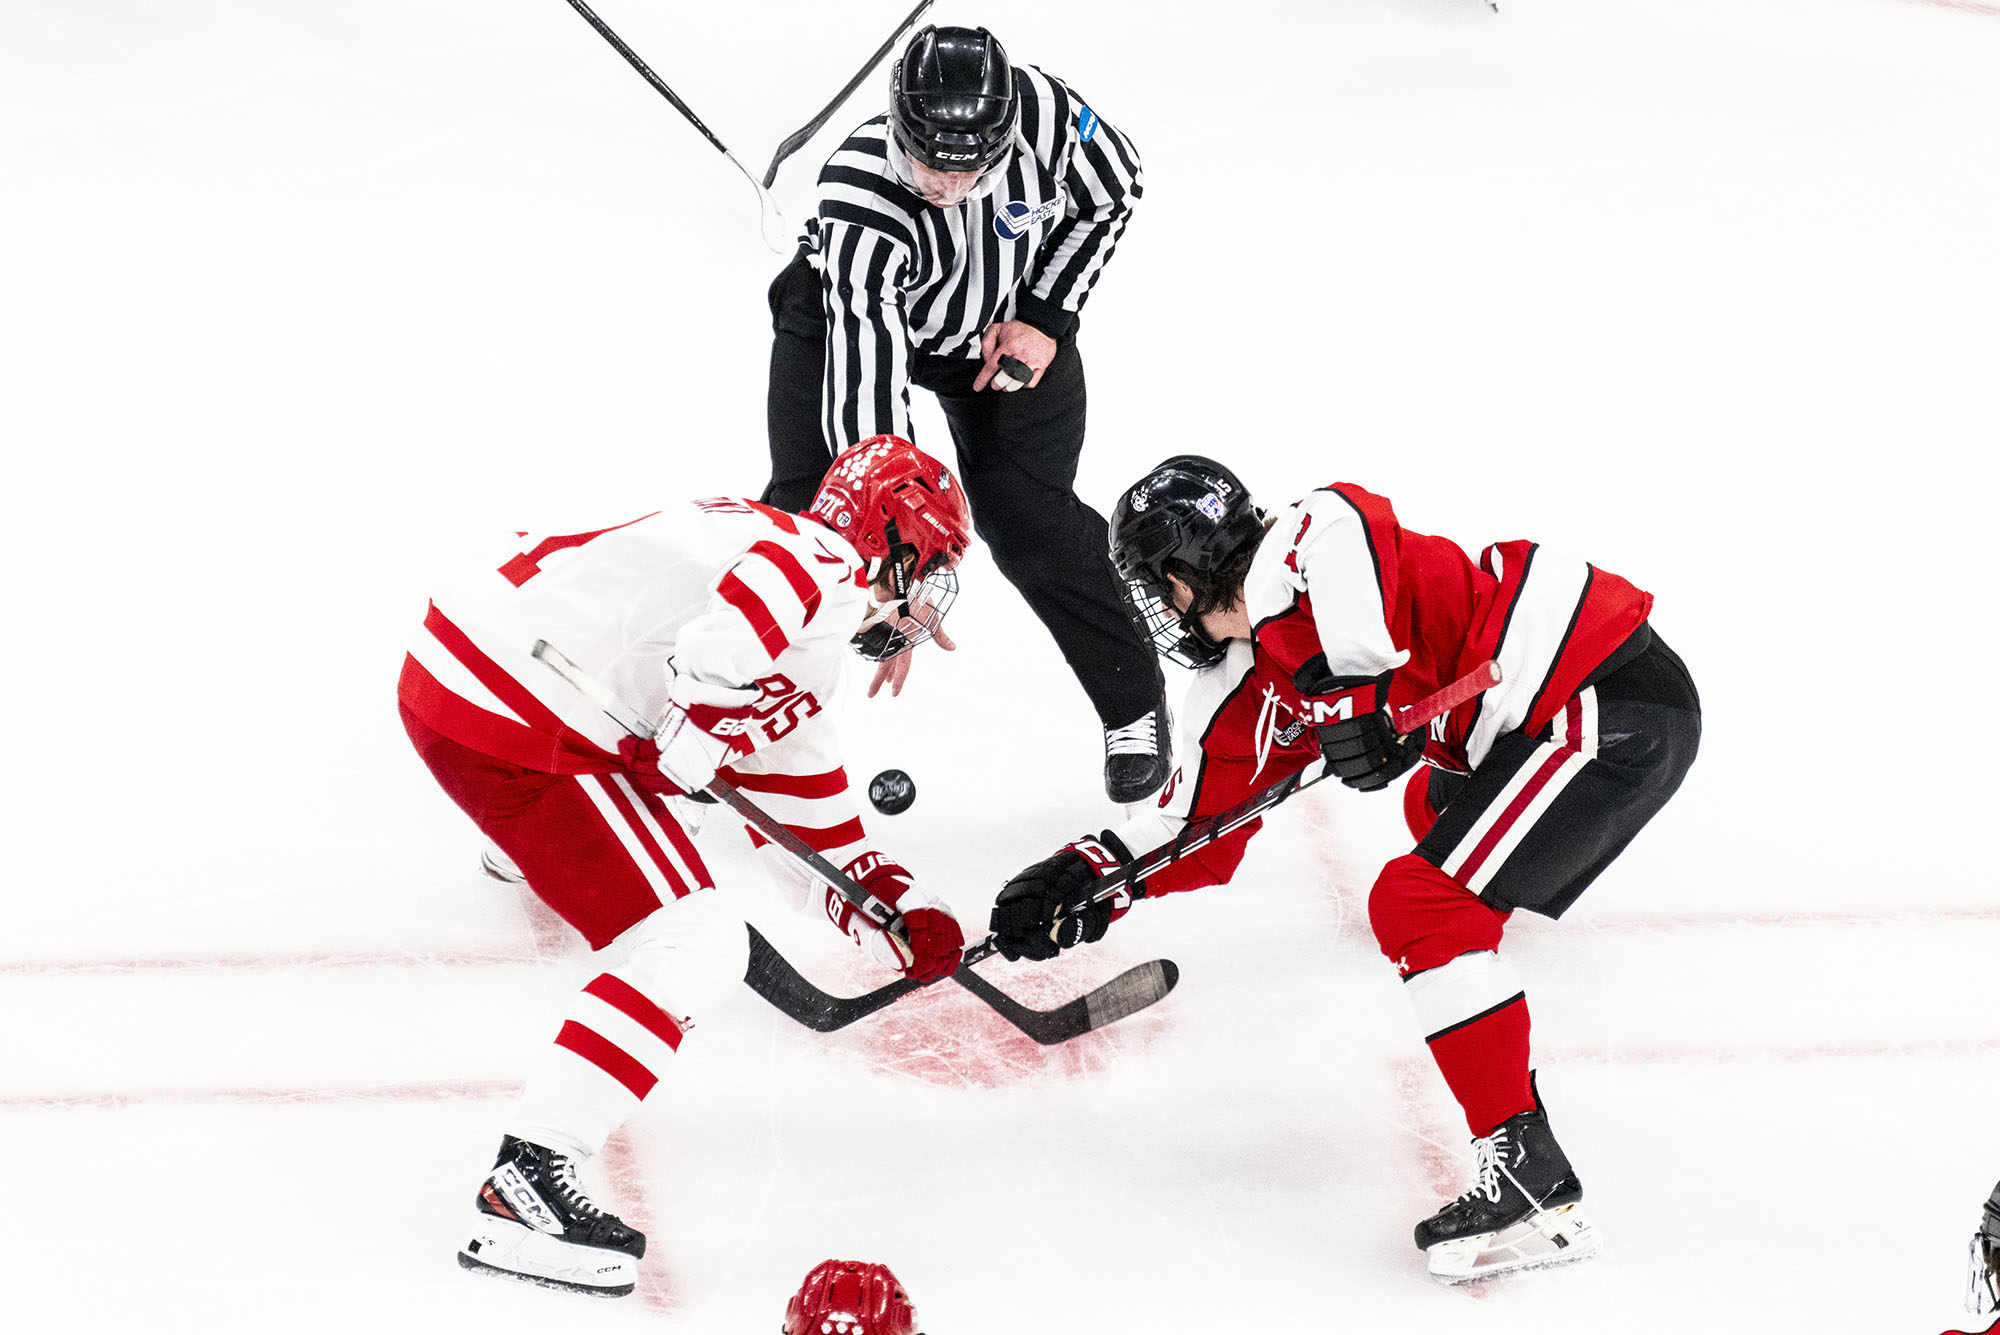 Photo: Two hockey players face off in college hockey game. Both are wearing red uniforms--on the left, BU red and white and one the right, red, black and white.